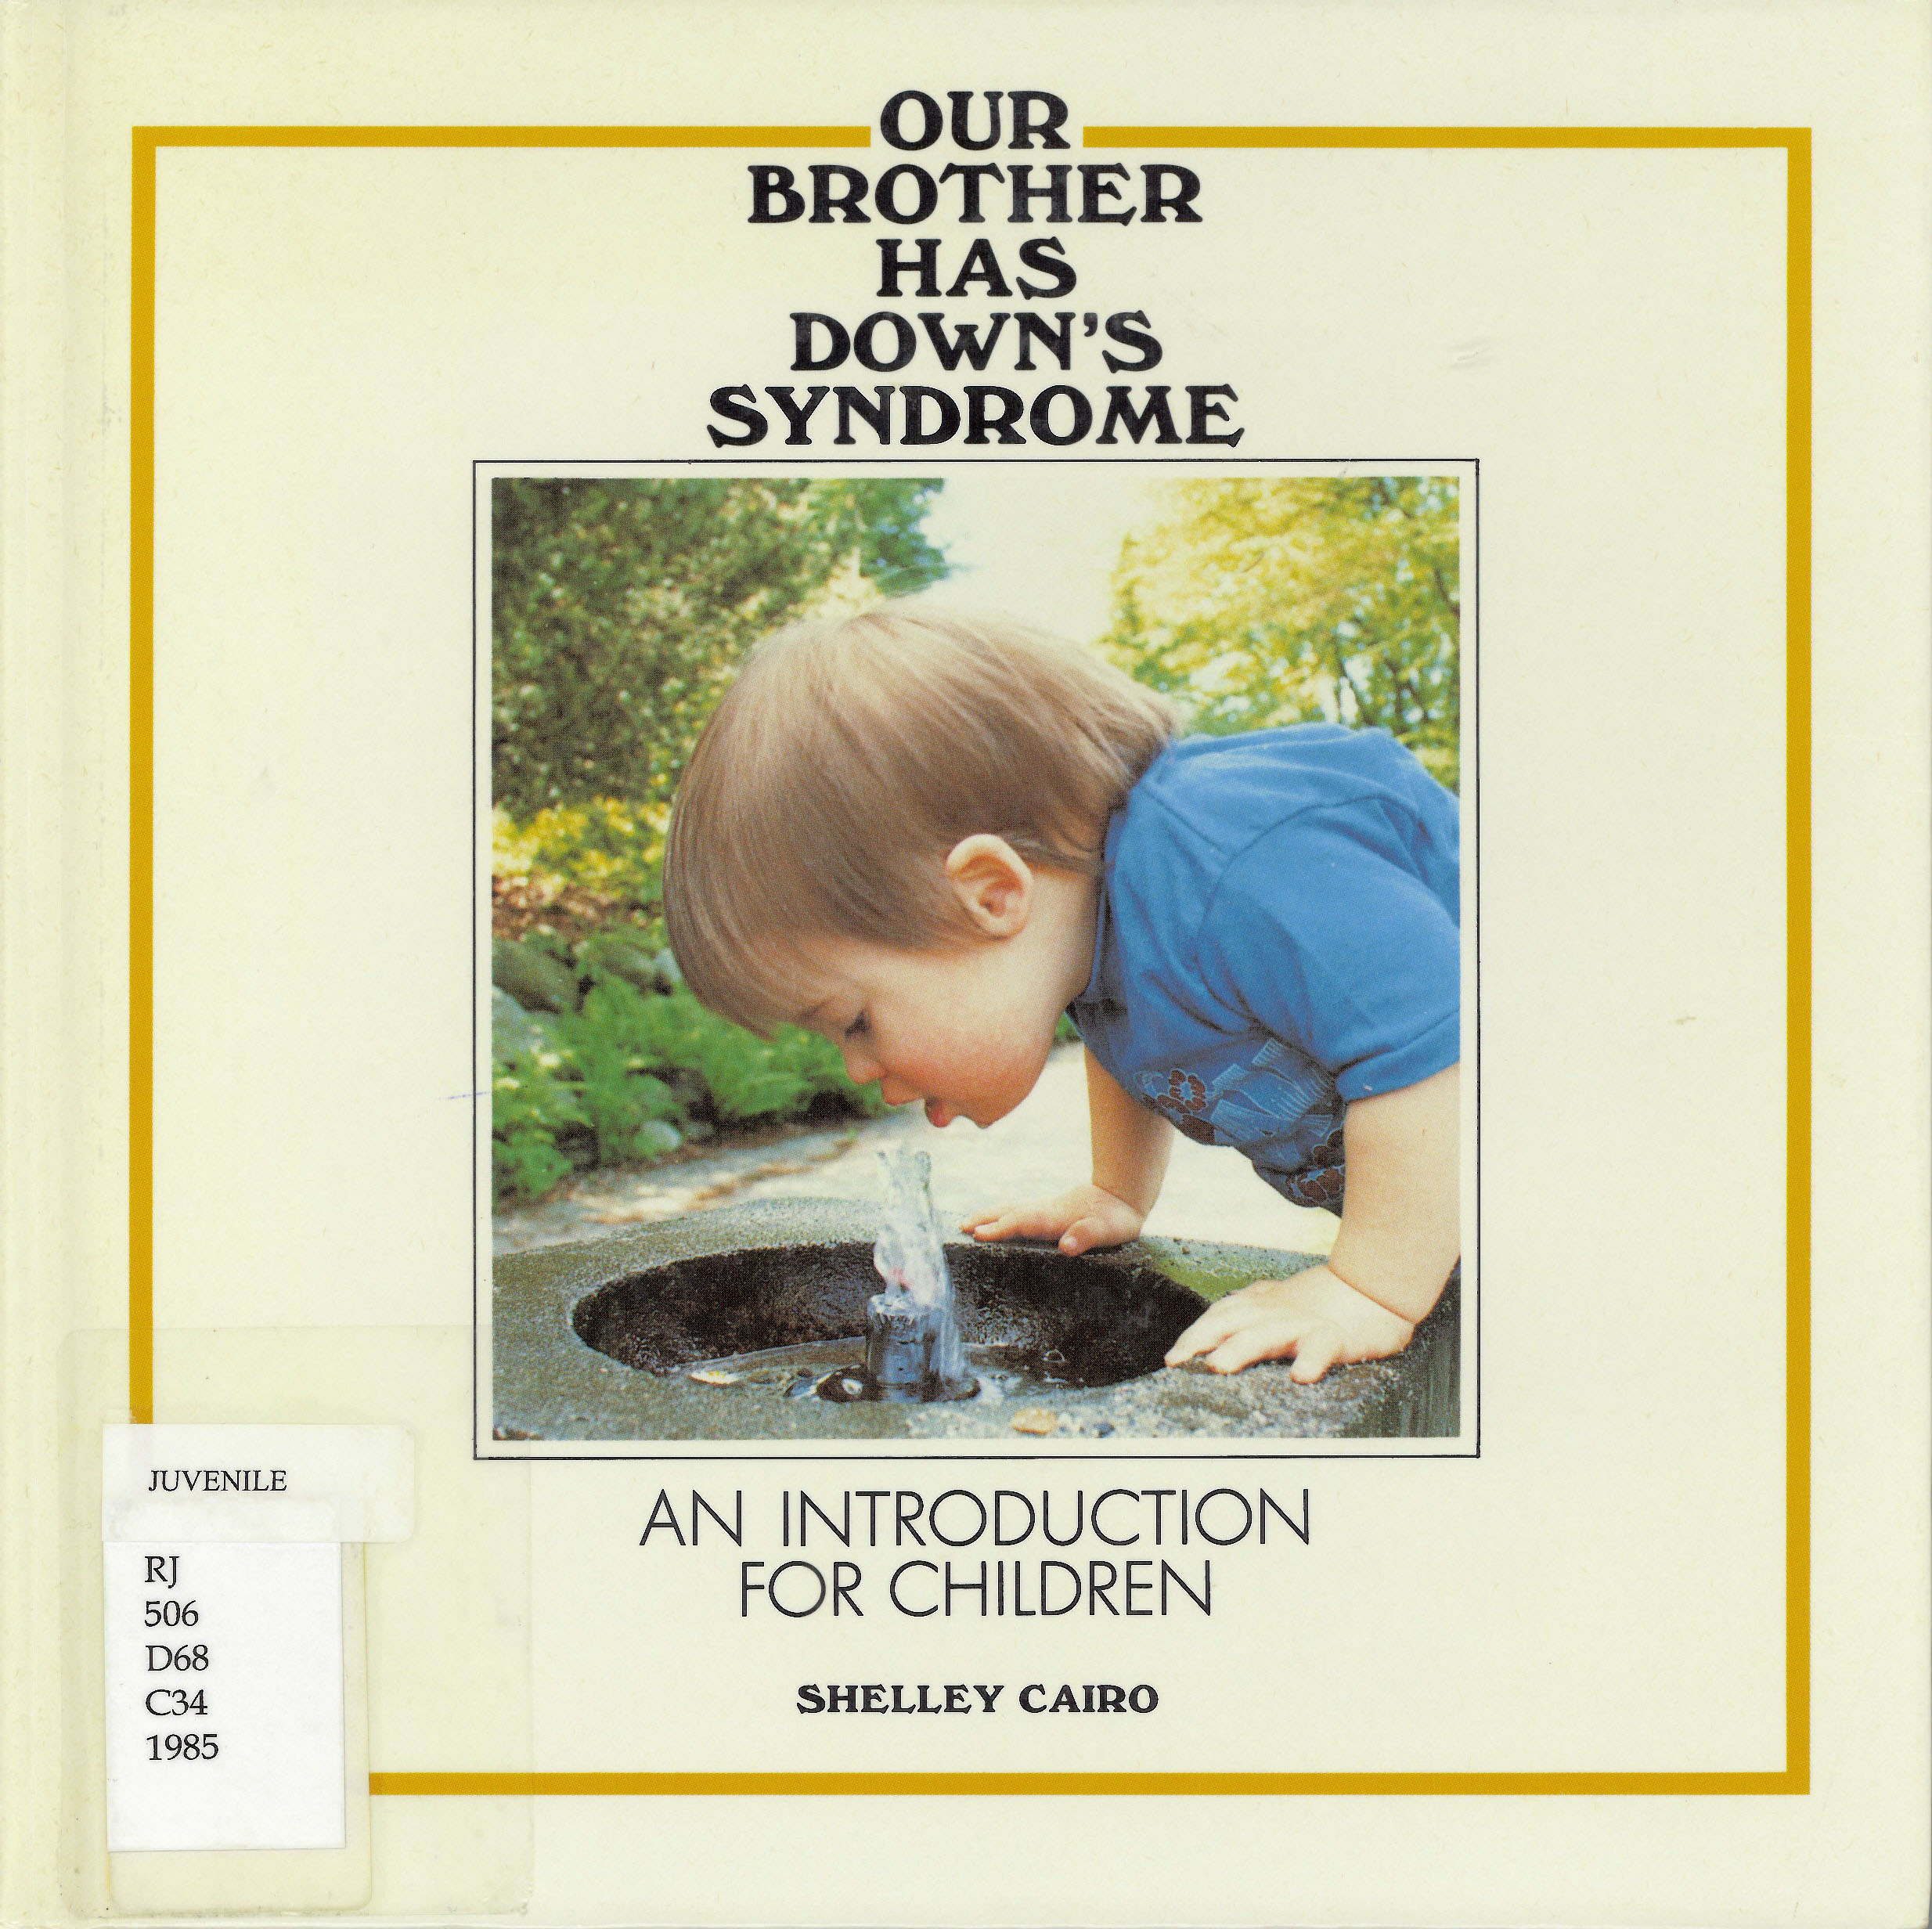 Our brother has Down's syndrome: introduction for children